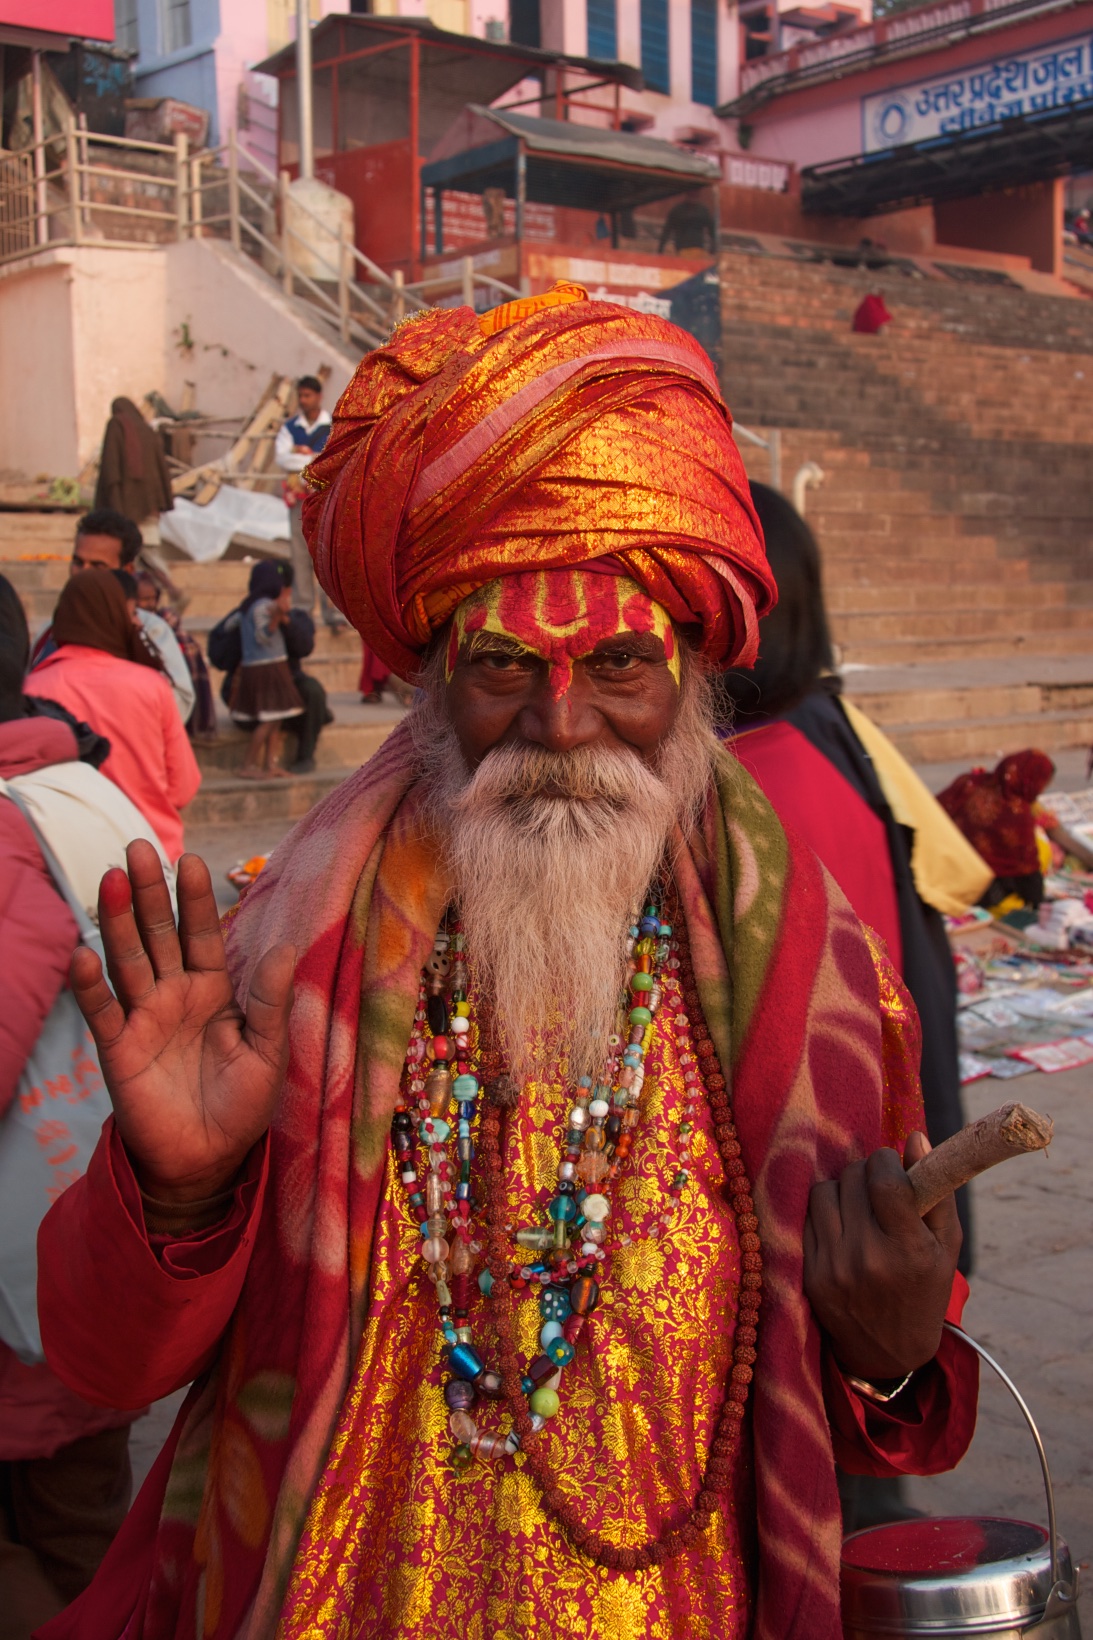 A self-appointed sadhu [wise man] asking for alms. Varanasi, India.